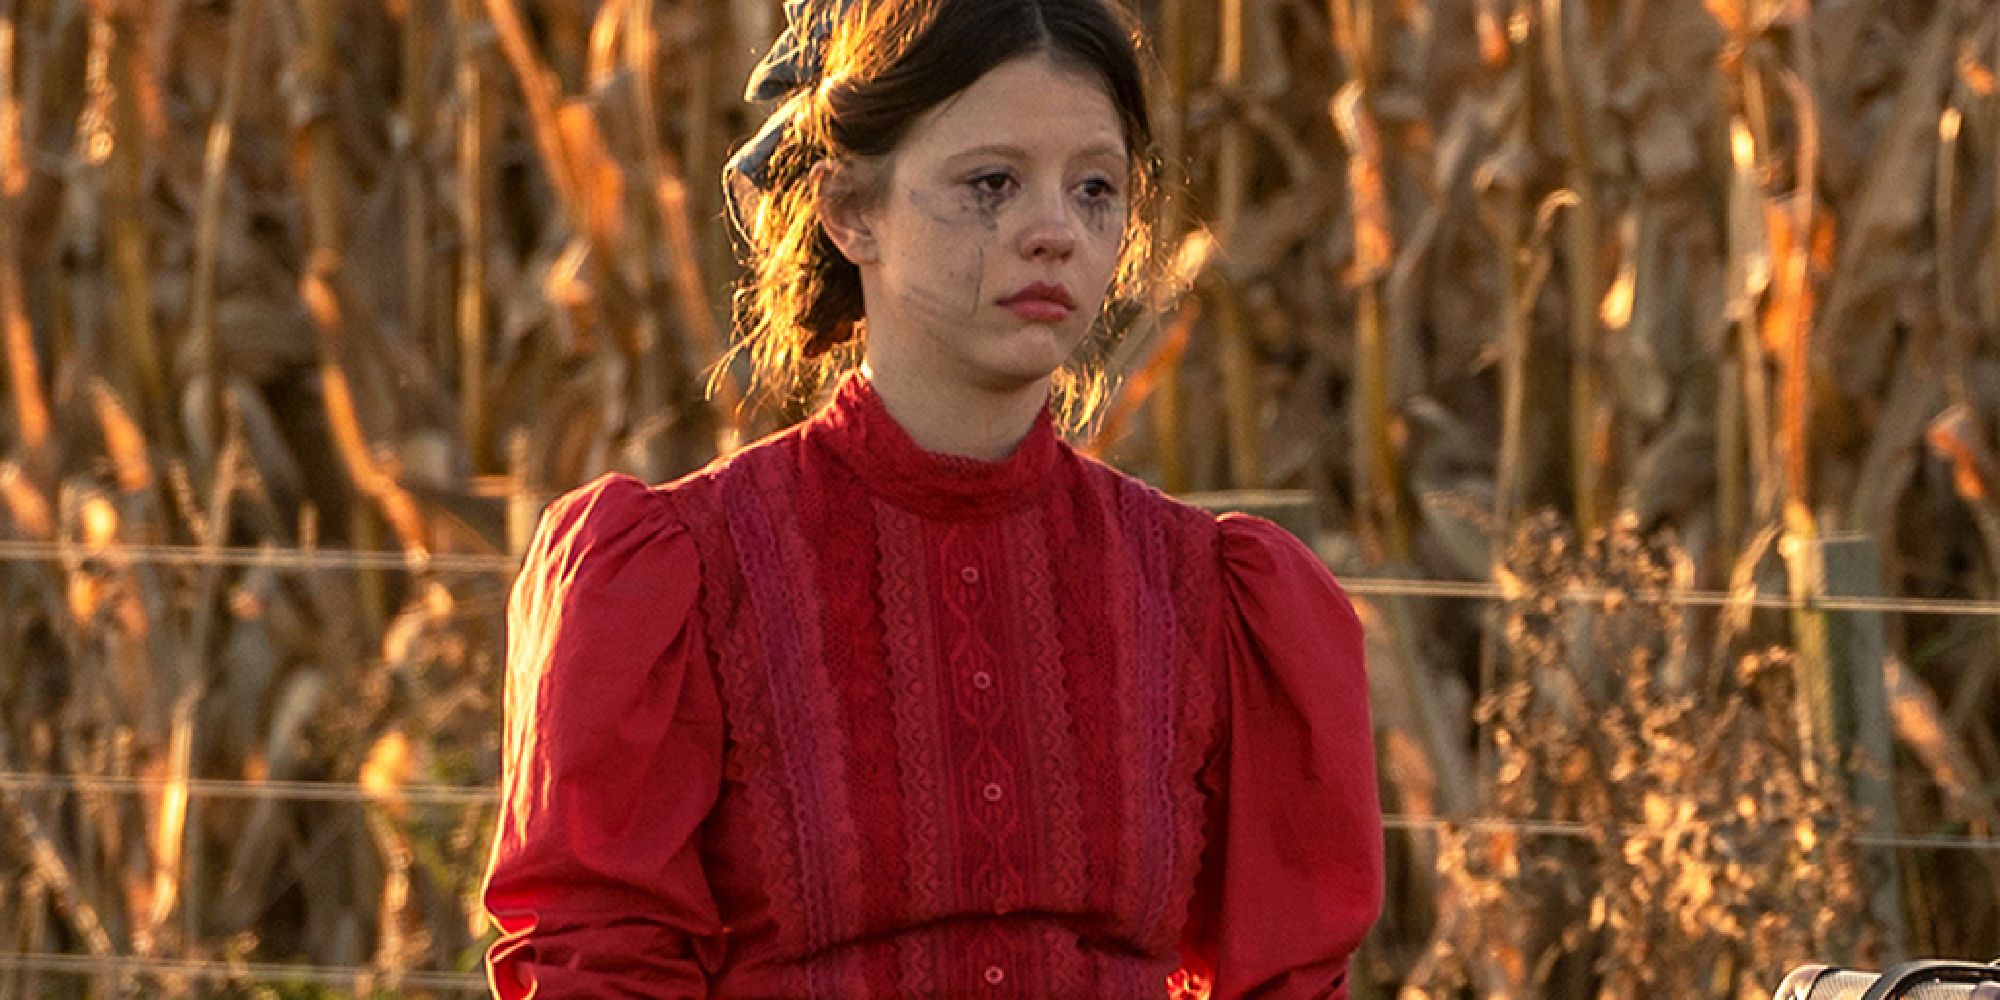 Mia Gith staring as Pearl, standing in the red dress with mascara tears staining her face.